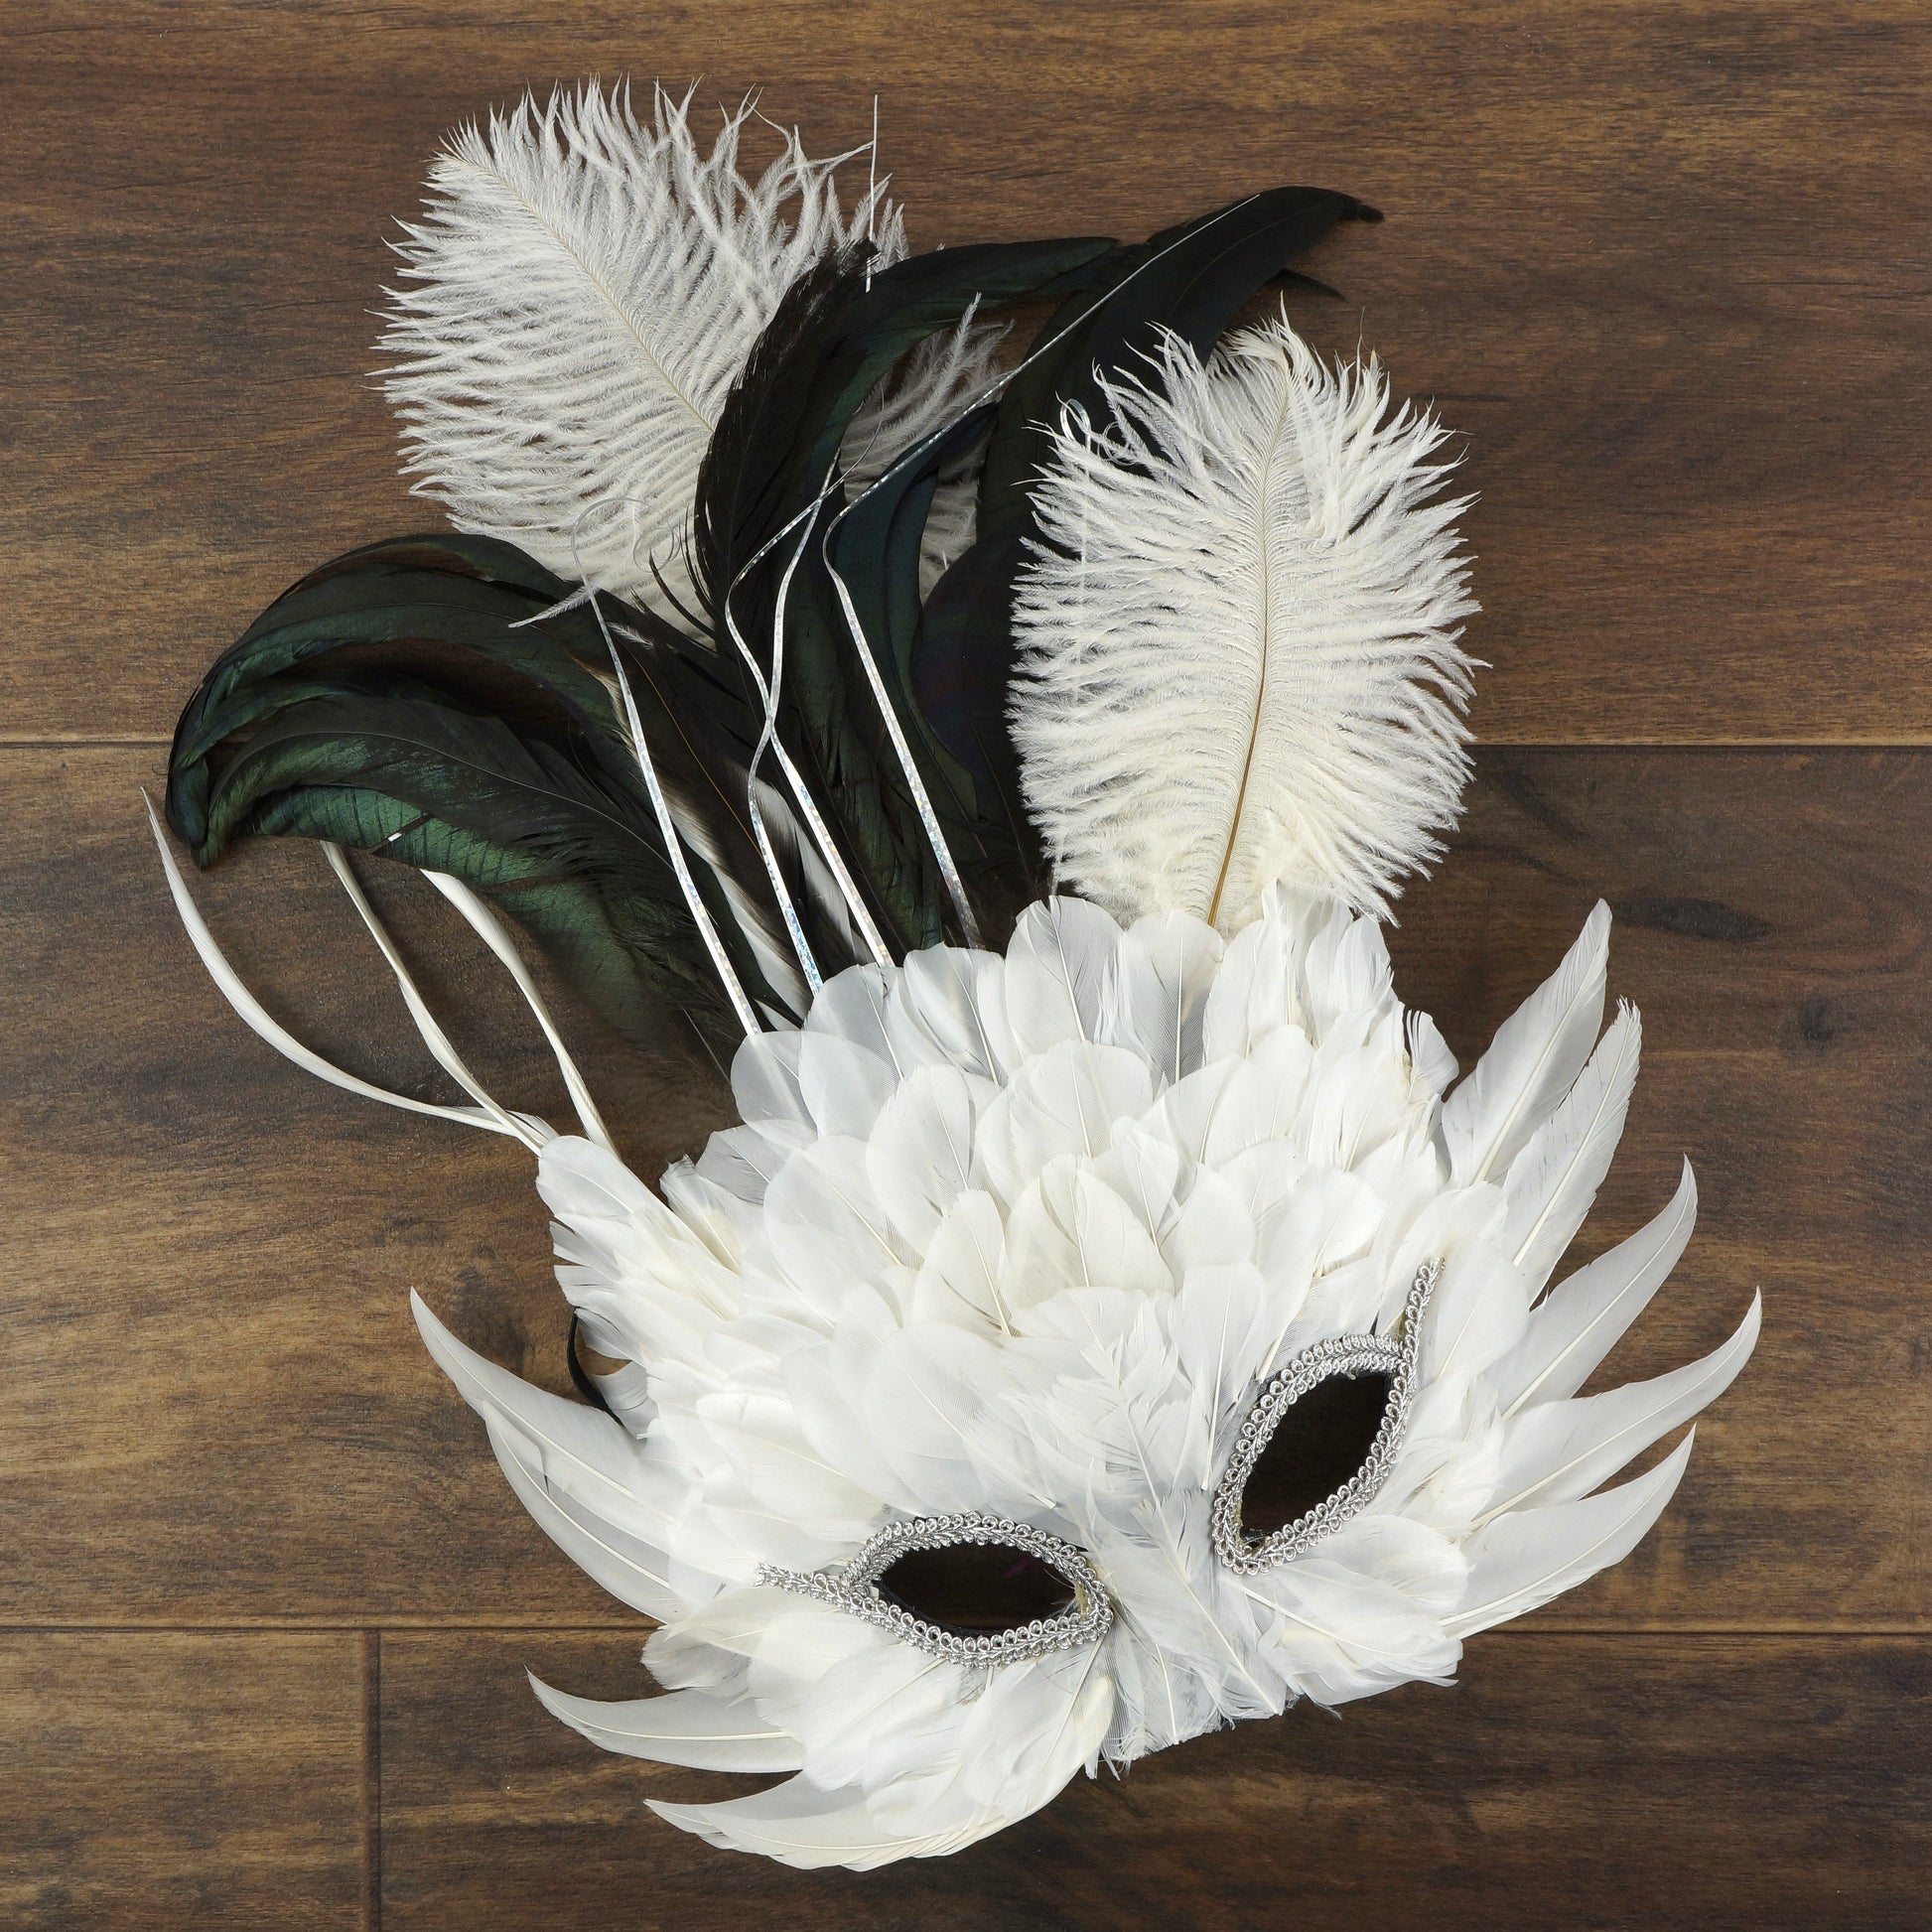 Ostrich Feather Fringe 1Ply - Ivory